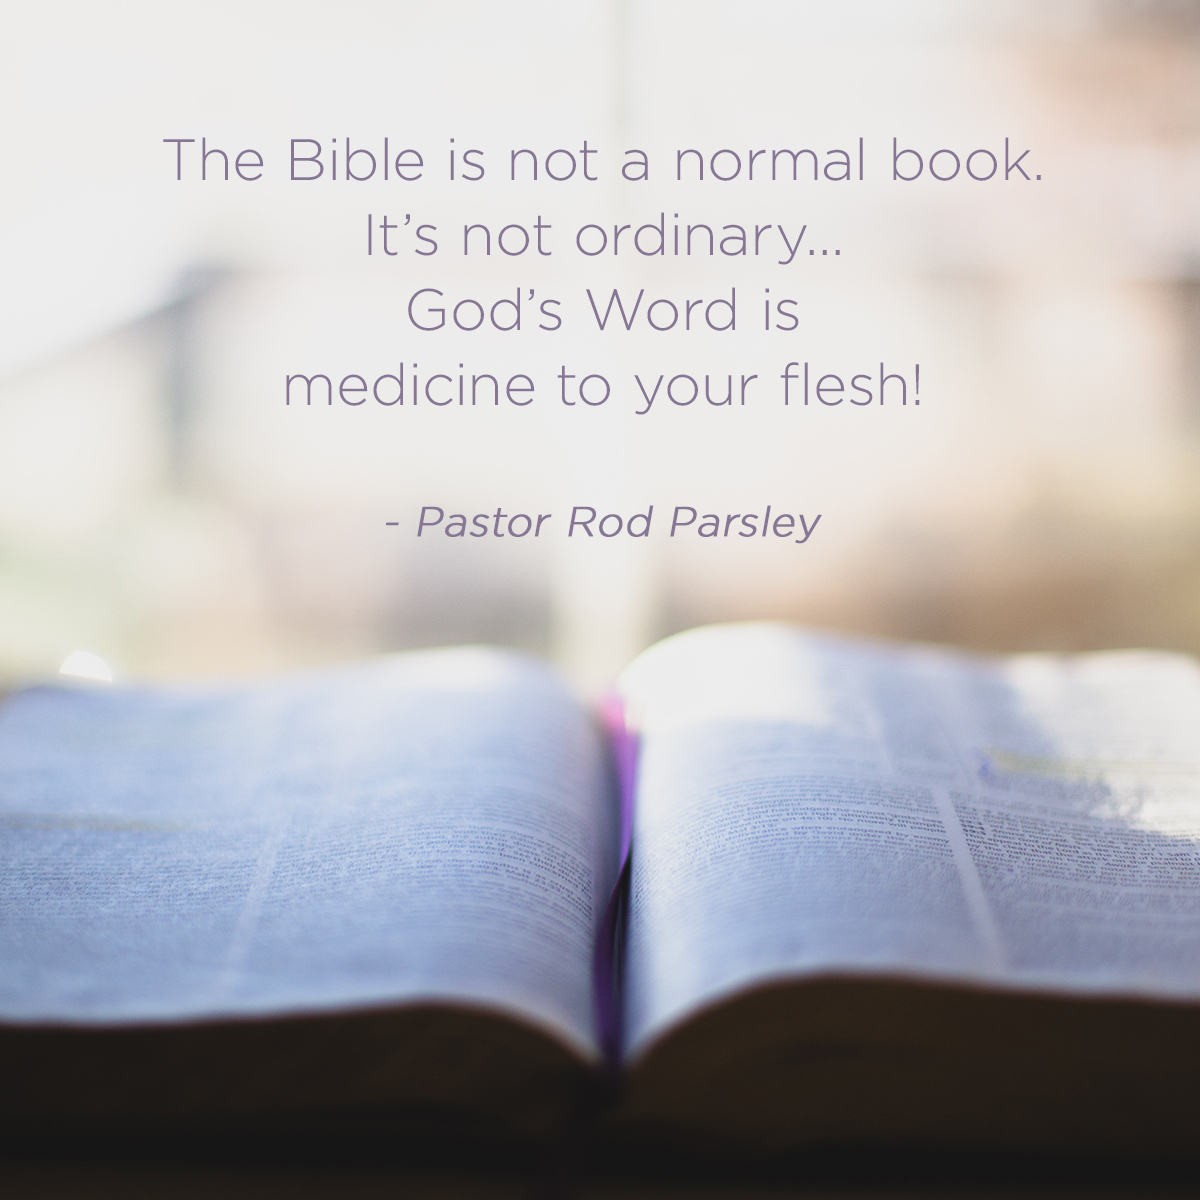 “The Bible is not a normal book. It’s not ordinary...God's word is medicine to your flesh!” – Pastor Rod Parsley